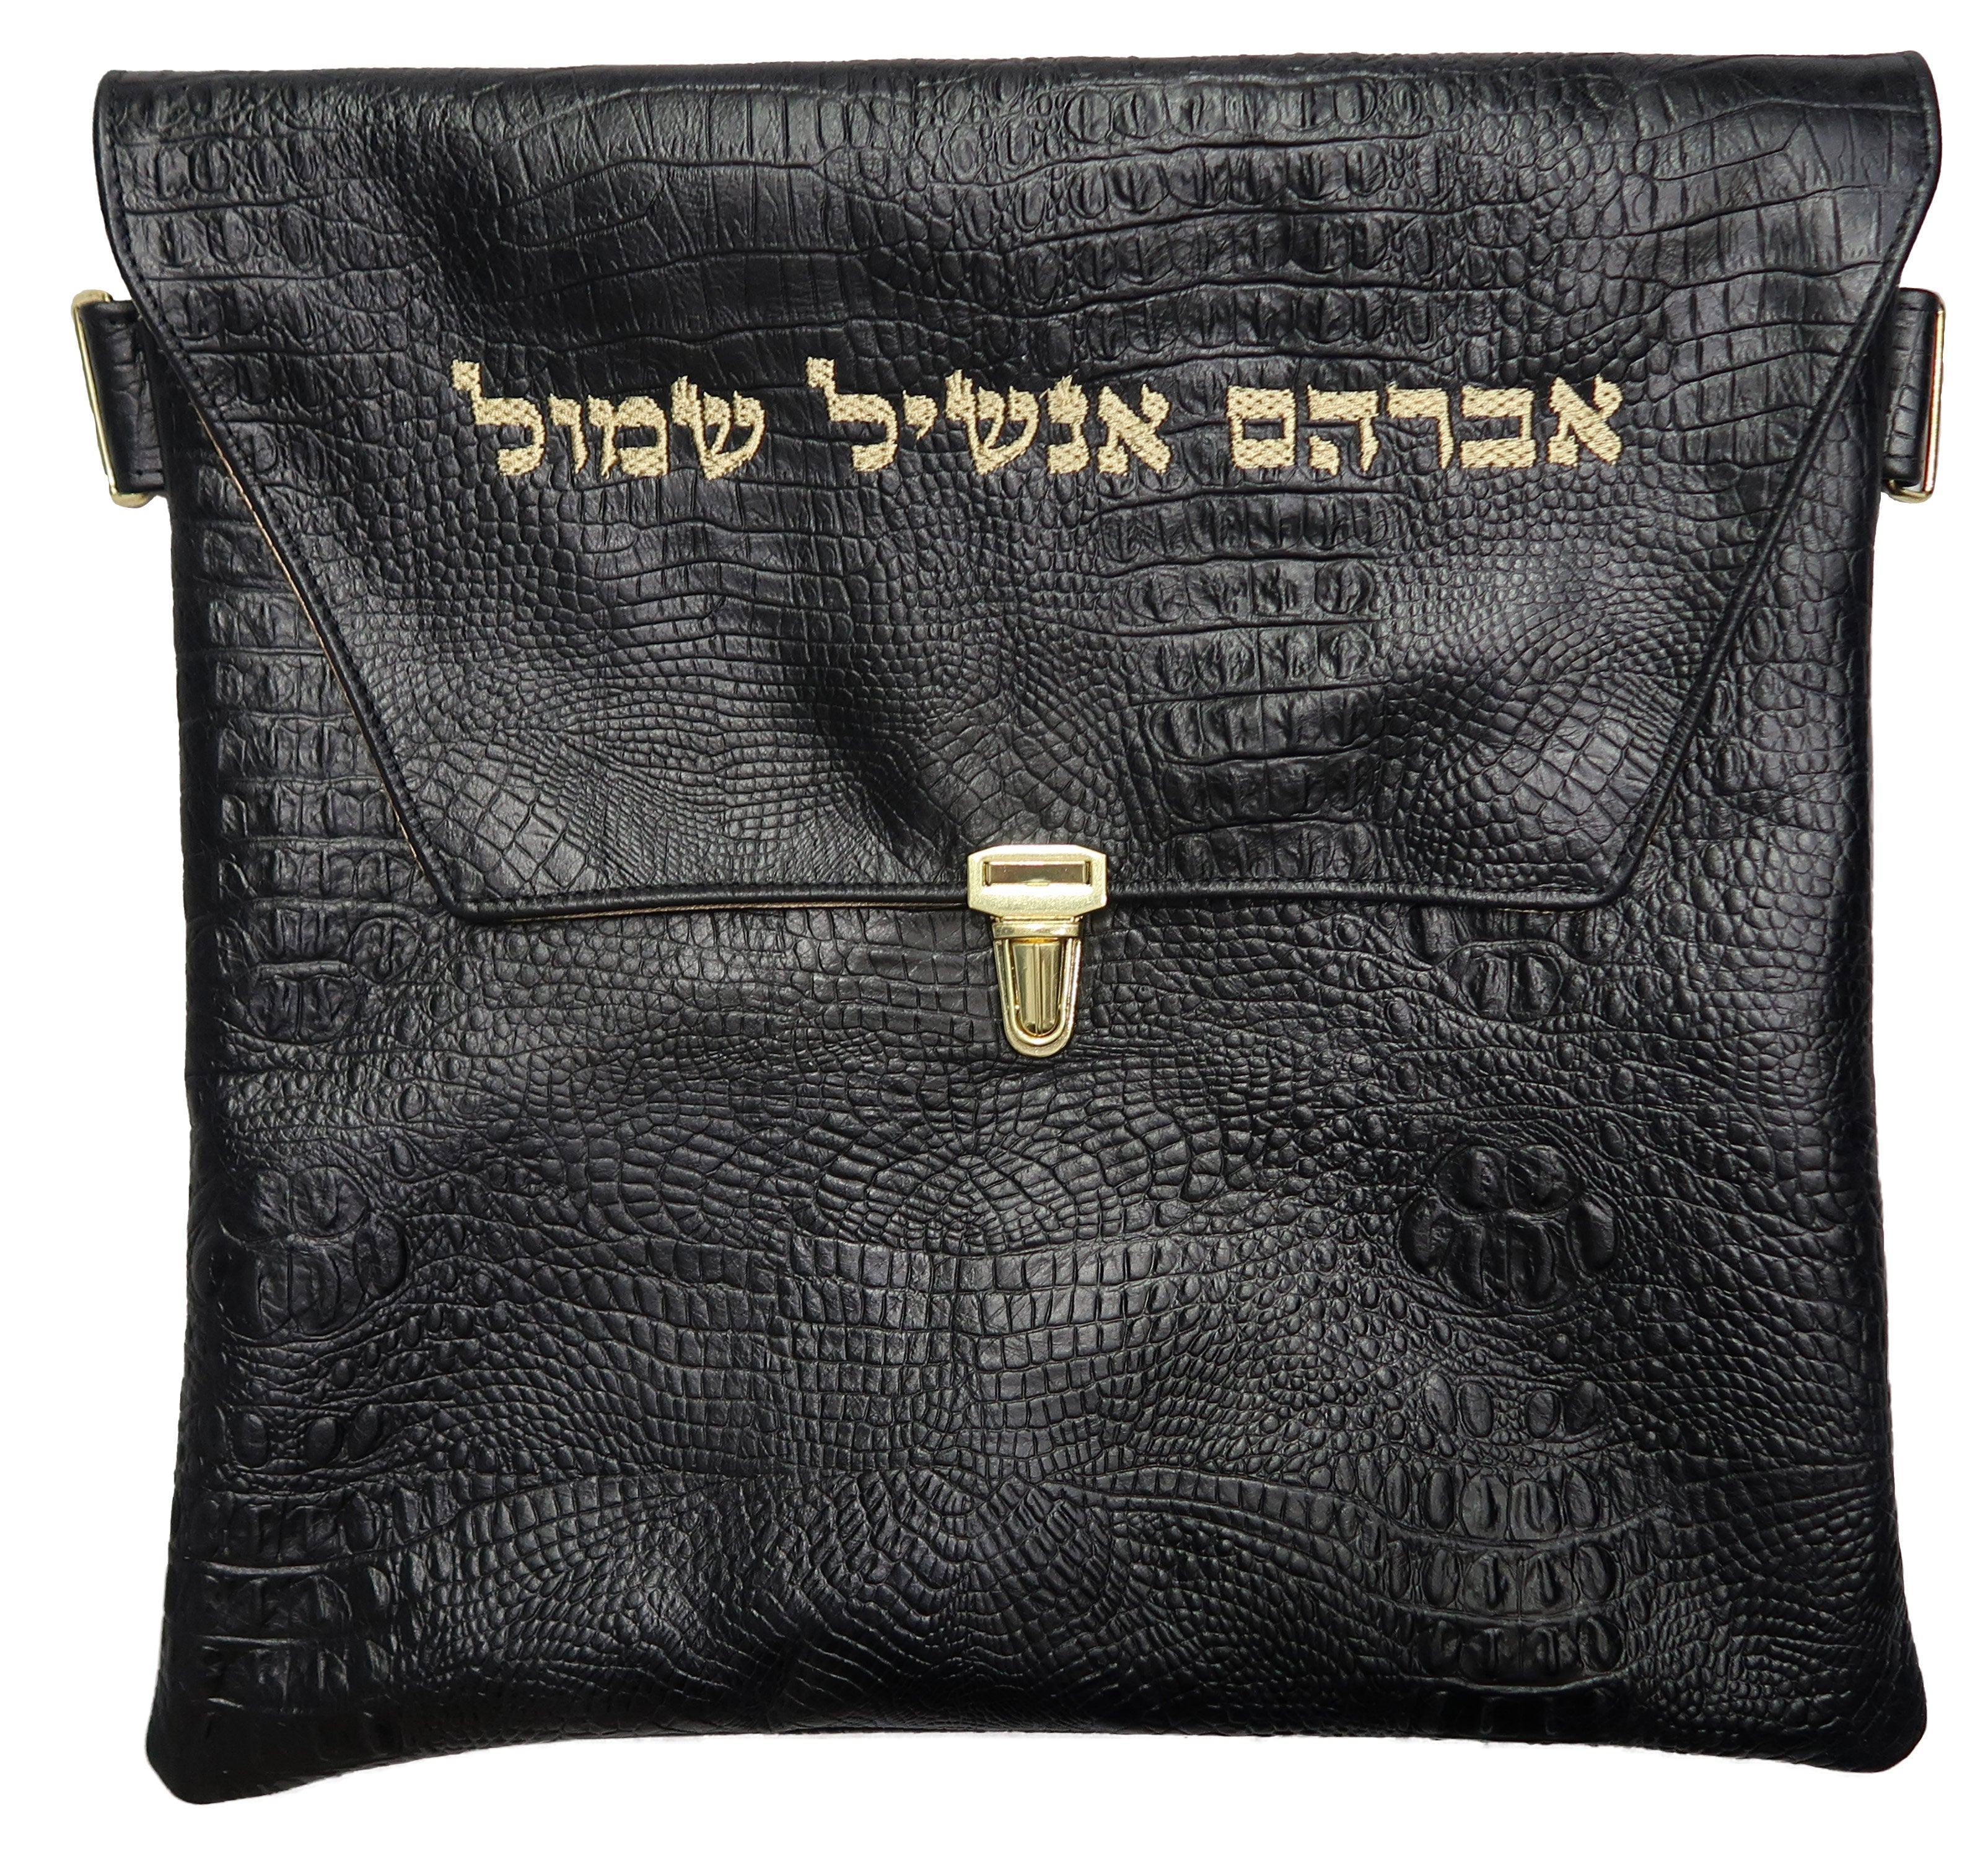 Black Croc Leather Tallis Tefillin Bag with a leather flap and gold hardware